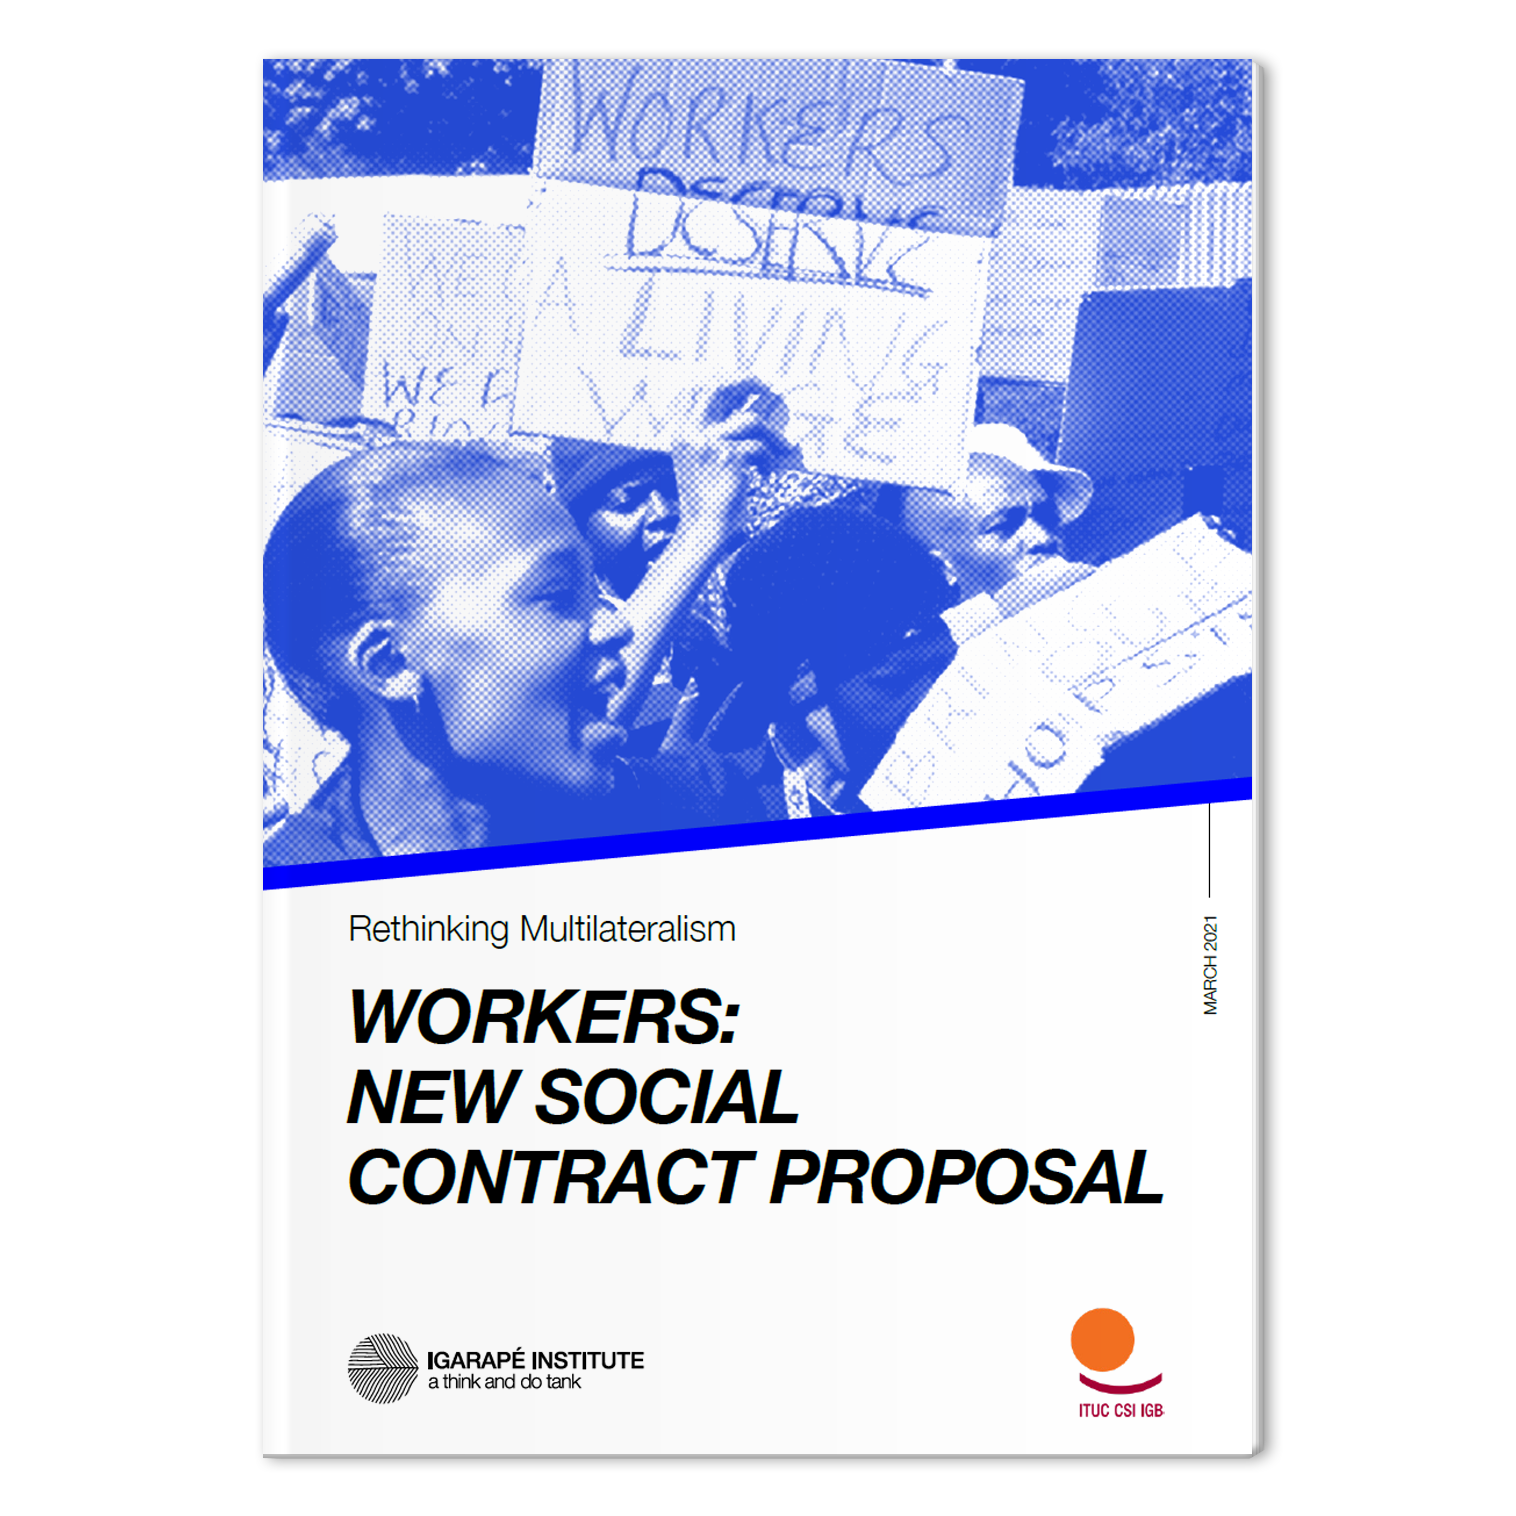 Workers: new social contract proposal